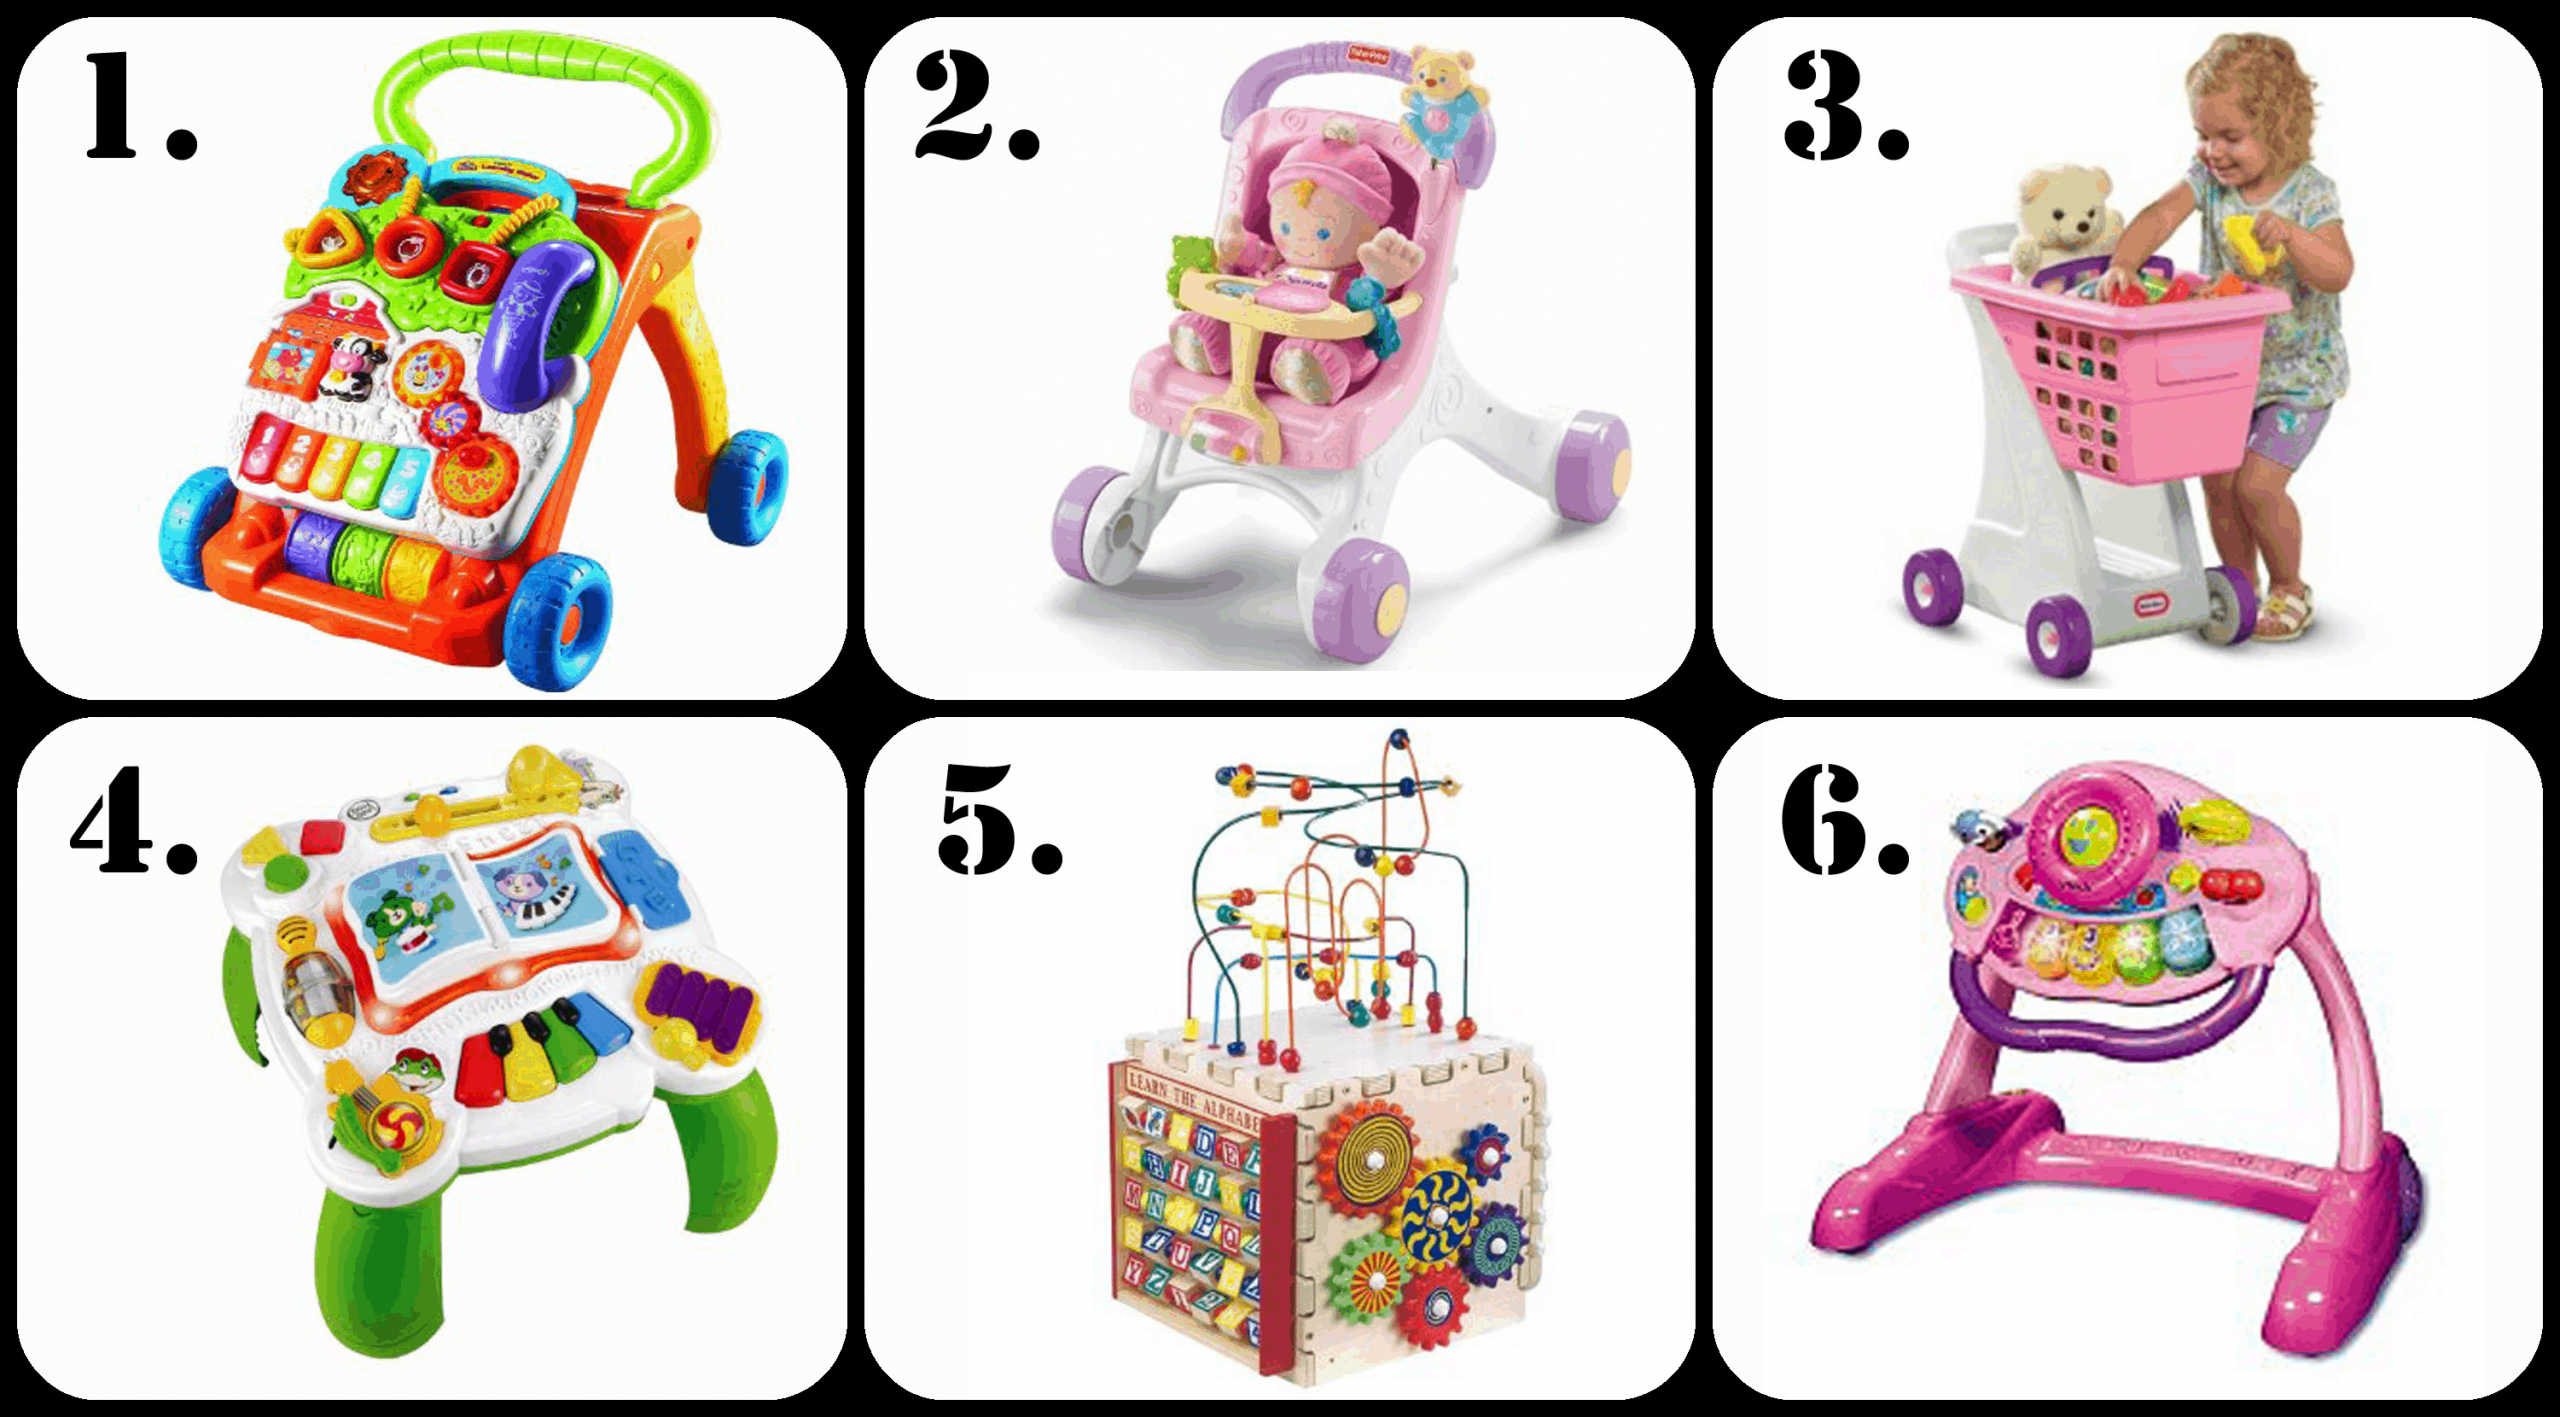 One Year Old Birthday Gift Ideas
 The Ultimate List of Gift Ideas for a 1 Year Old Girl